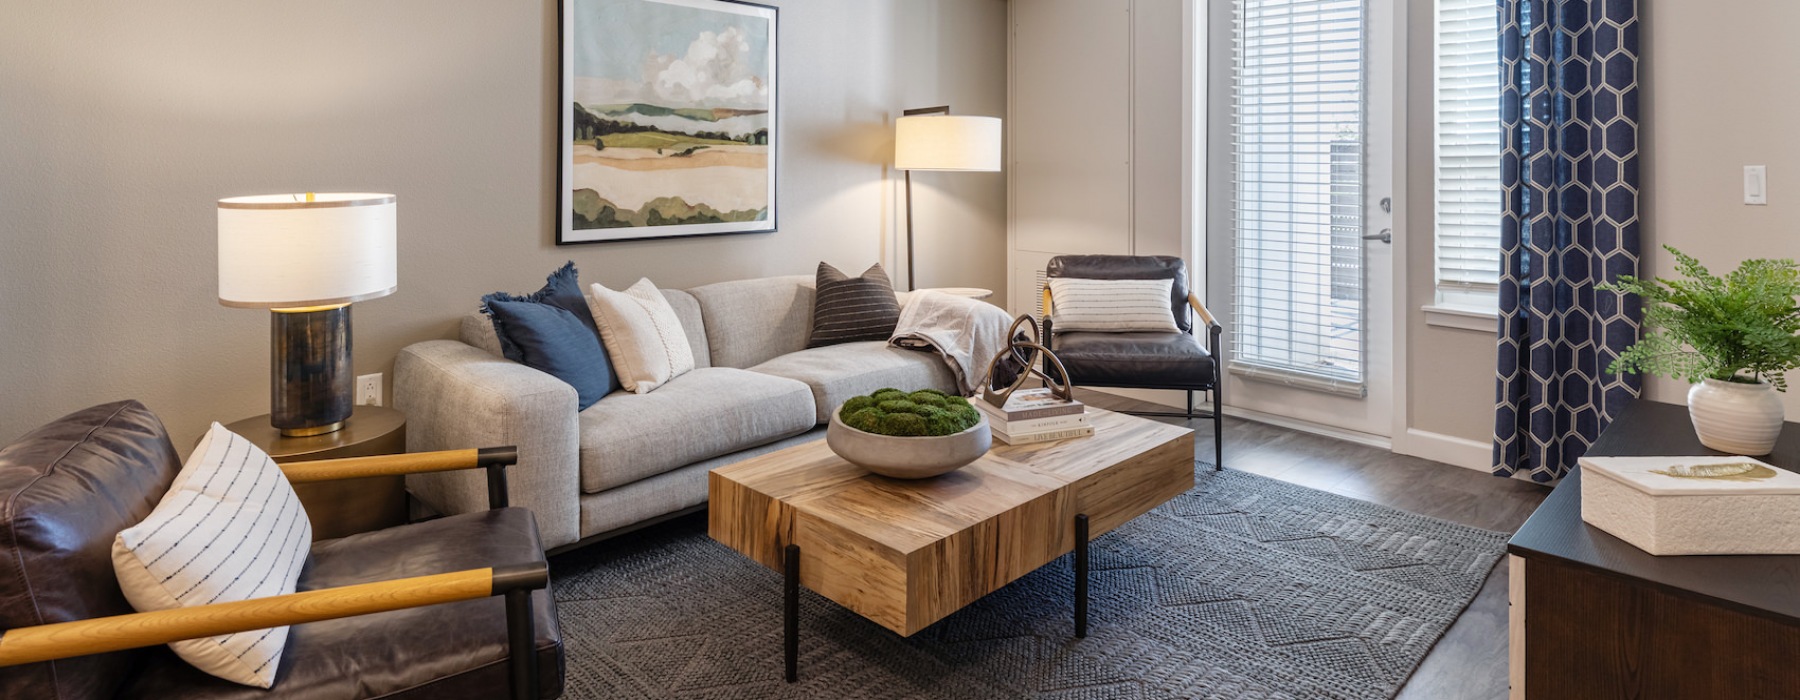 Model living room at our 55 and over apartments in Loveland, CO, featuring a couch, table, and windows with curtains.